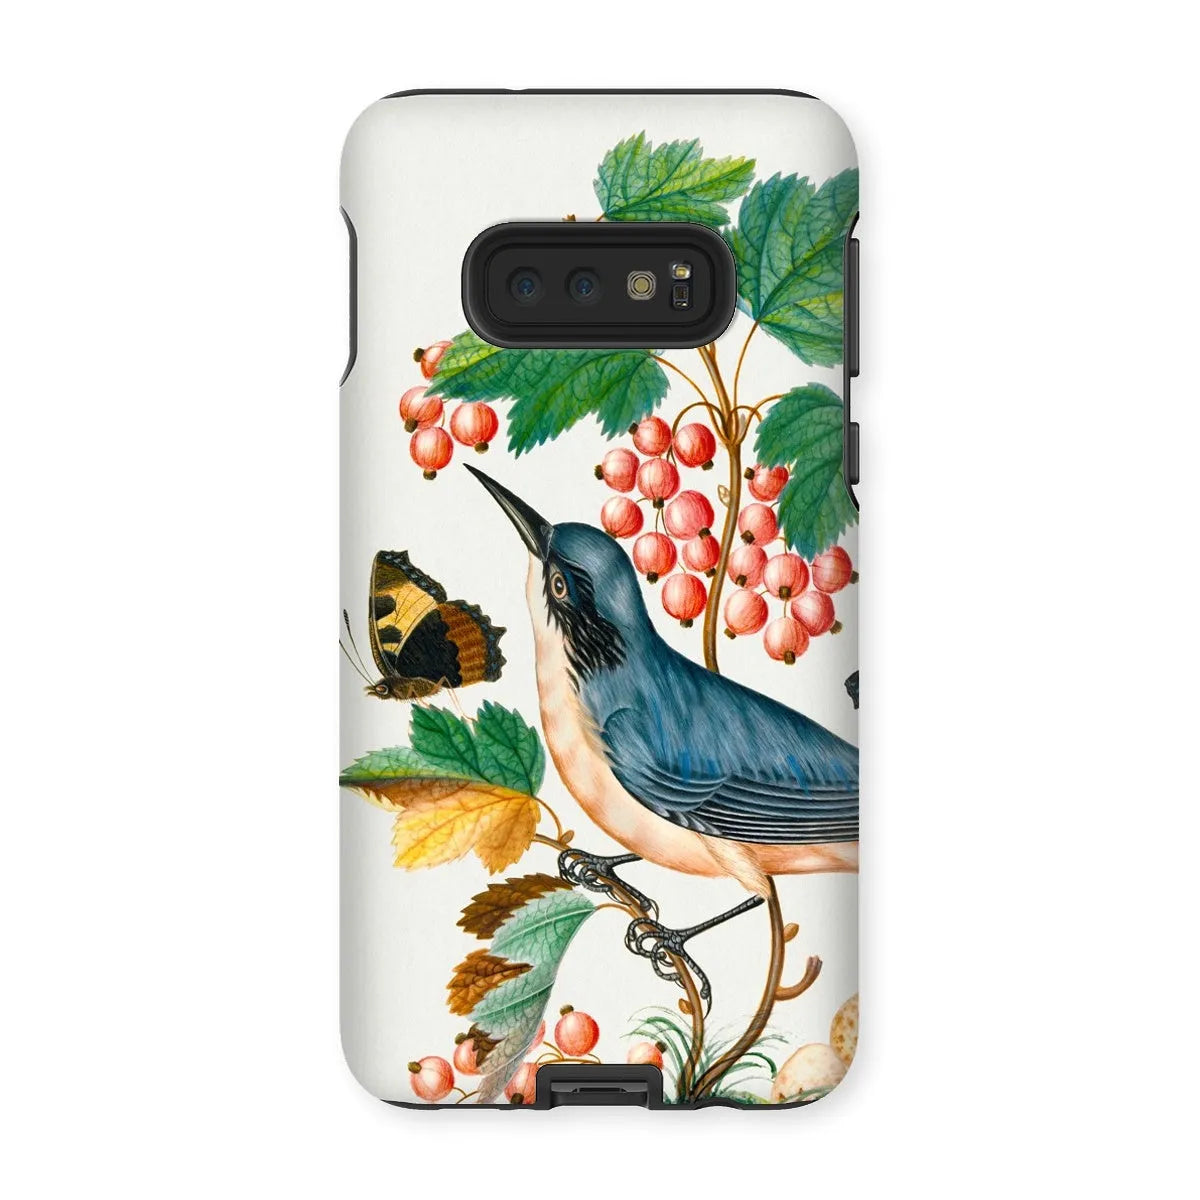 Warbler Admiral Wasps & Ants - Art Phone Case - James Bolton - Samsung Galaxy S10e / Matte - Mobile Phone Cases